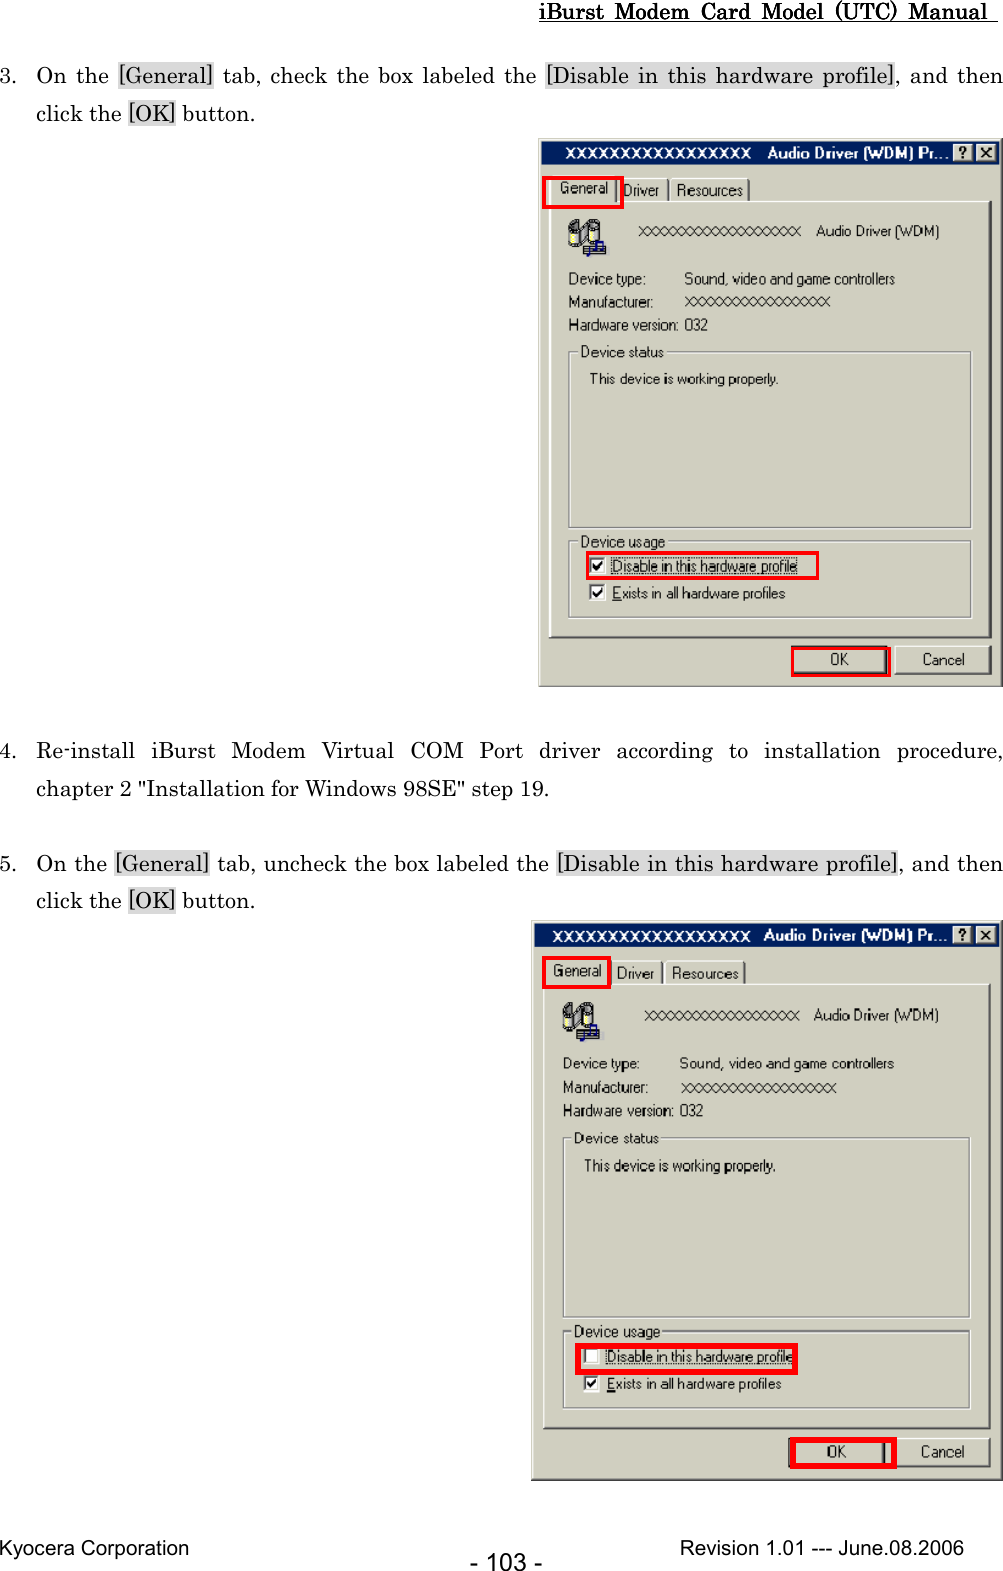 iBurst  Modem  Card  Model  (UTC)  Manual iBurst  Modem  Card  Model  (UTC)  Manual iBurst  Modem  Card  Model  (UTC)  Manual iBurst  Modem  Card  Model  (UTC)  Manual       Kyocera Corporation                                                                                              Revision 1.01 --- June.08.2006 - 103 - 3. On the [General] tab, check  the box labeled the [Disable in  this  hardware profile], and  then click the [OK] button.   4. Re-install  iBurst  Modem  Virtual  COM  Port  driver  according  to  installation  procedure,   chapter 2 &quot;Installation for Windows 98SE&quot; step 19.  5. On the [General] tab, uncheck the box labeled the [Disable in this hardware profile], and then click the [OK] button.   